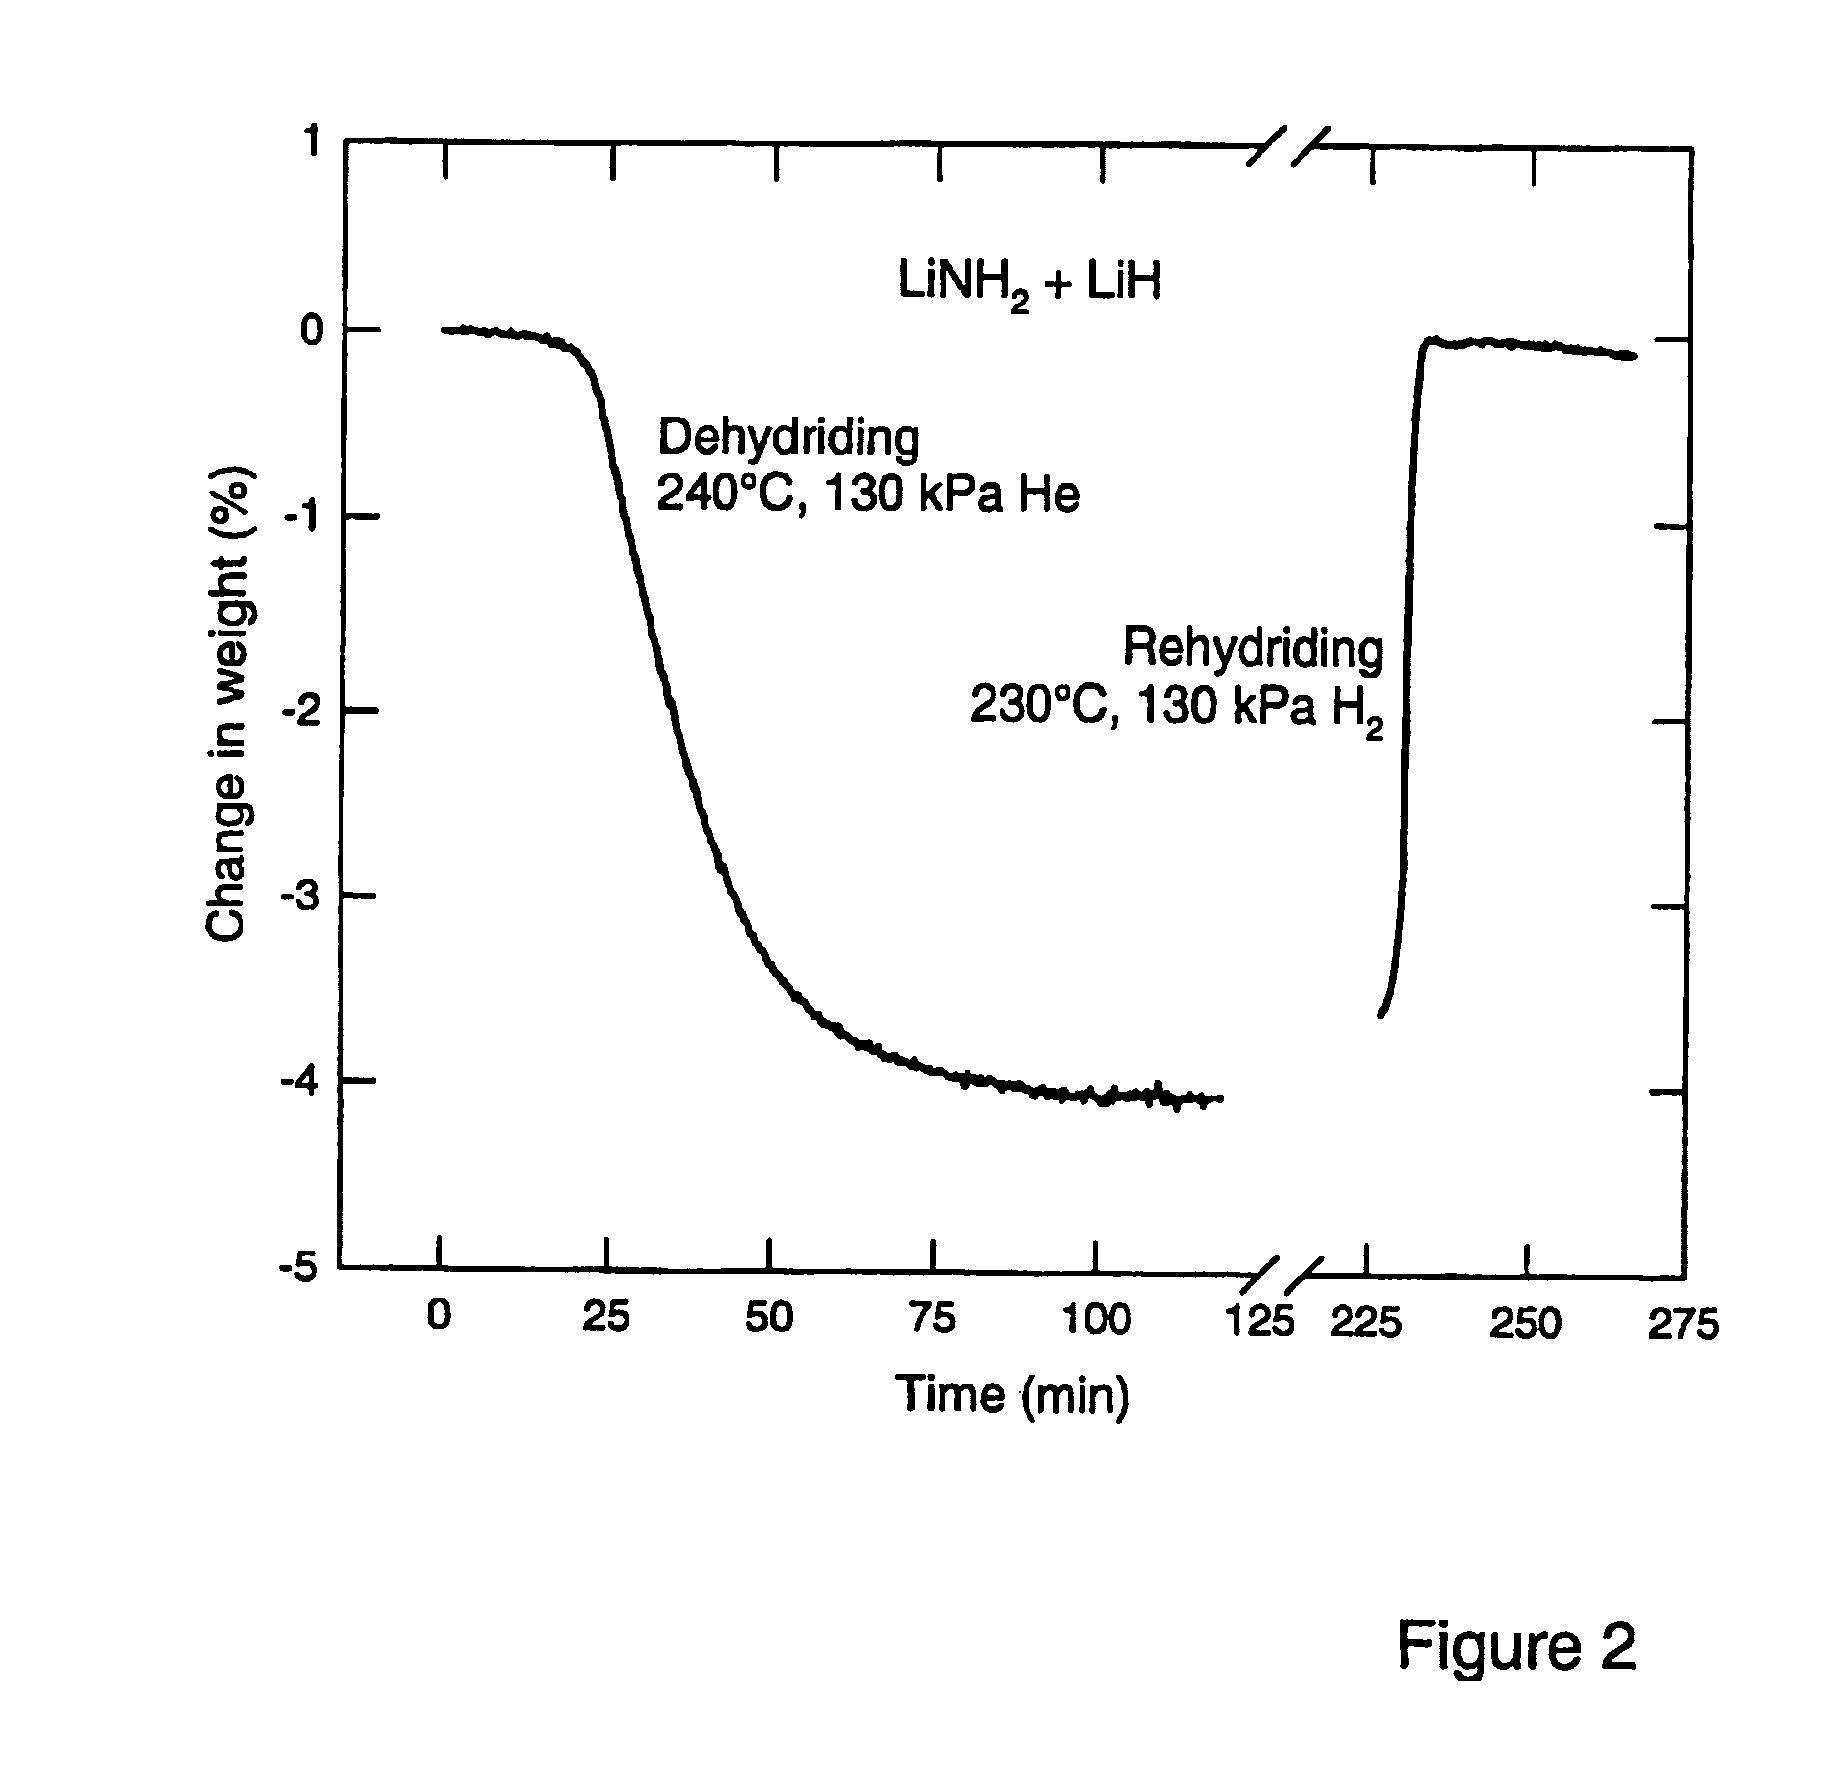 Imide/amide hydrogen storage materials and methods